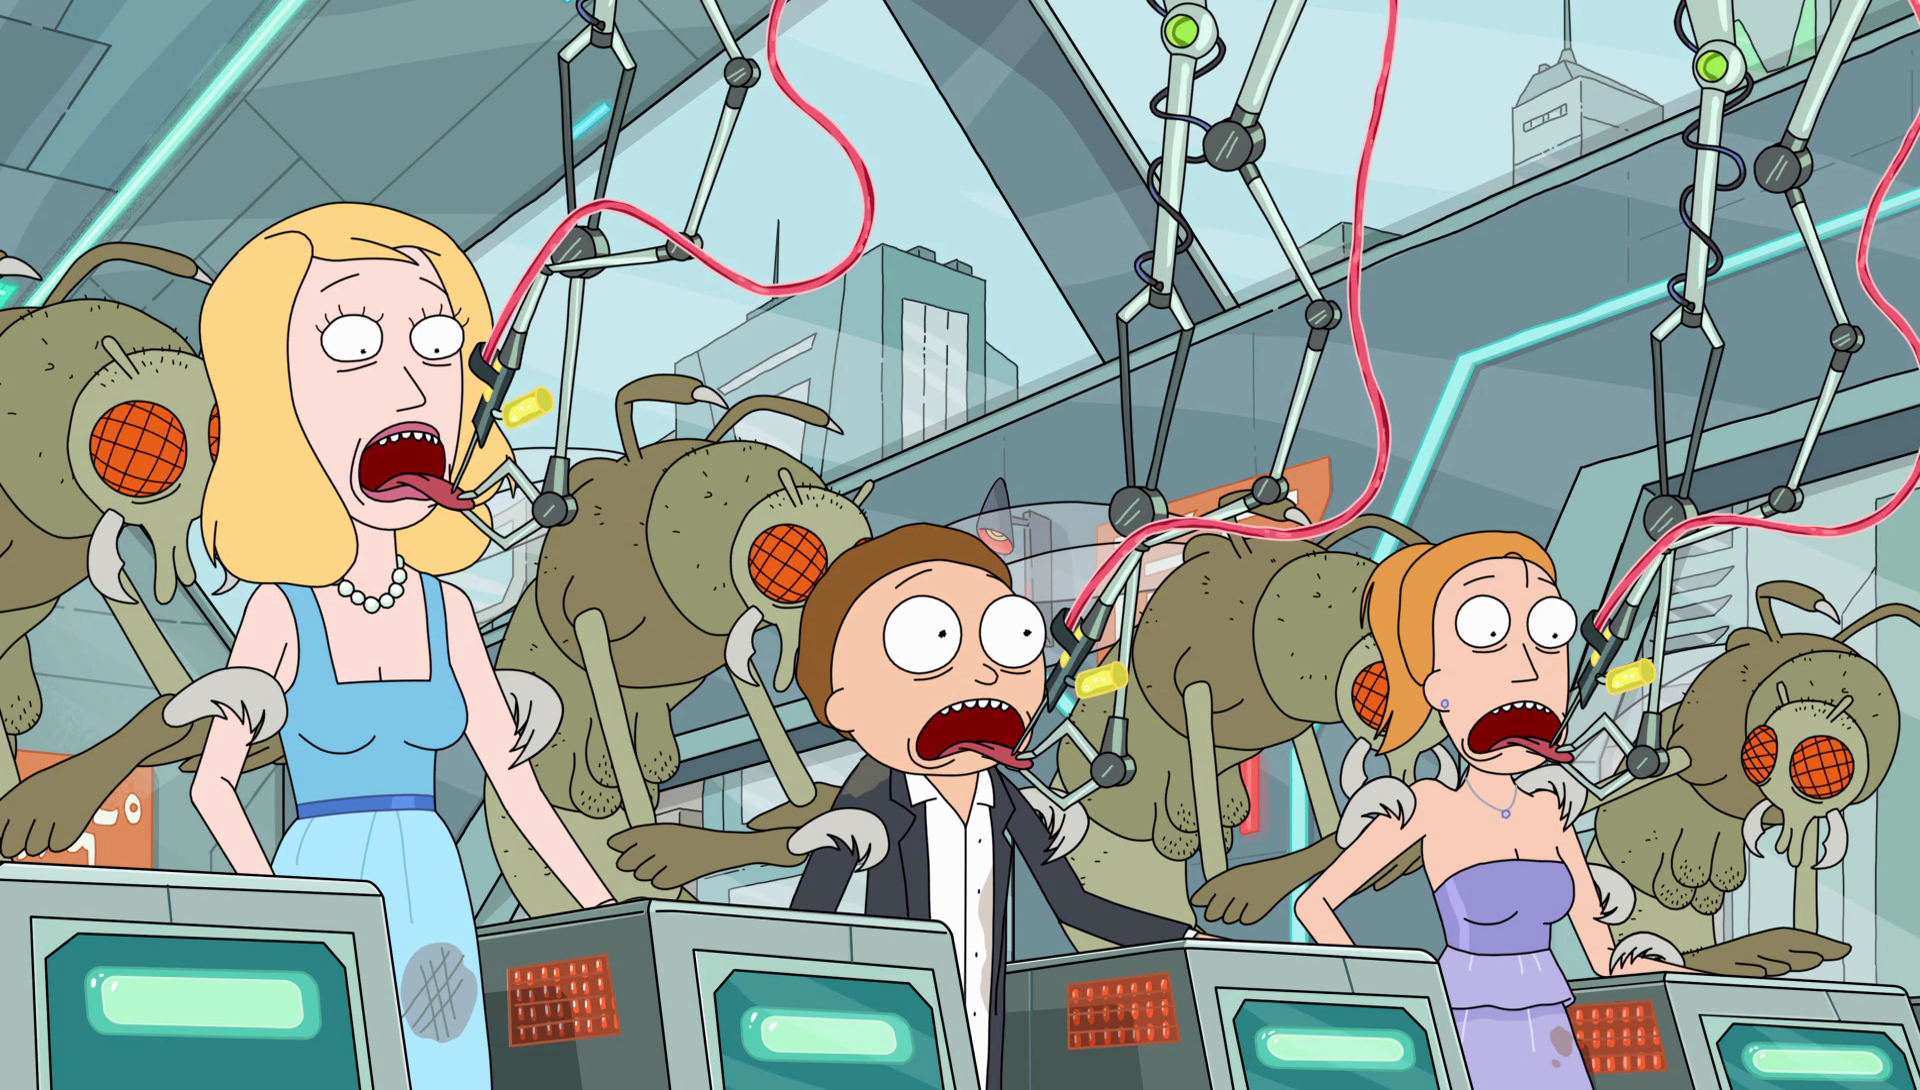 Image S2e10 Beth Summer Morty Dna Png Rick And Morty